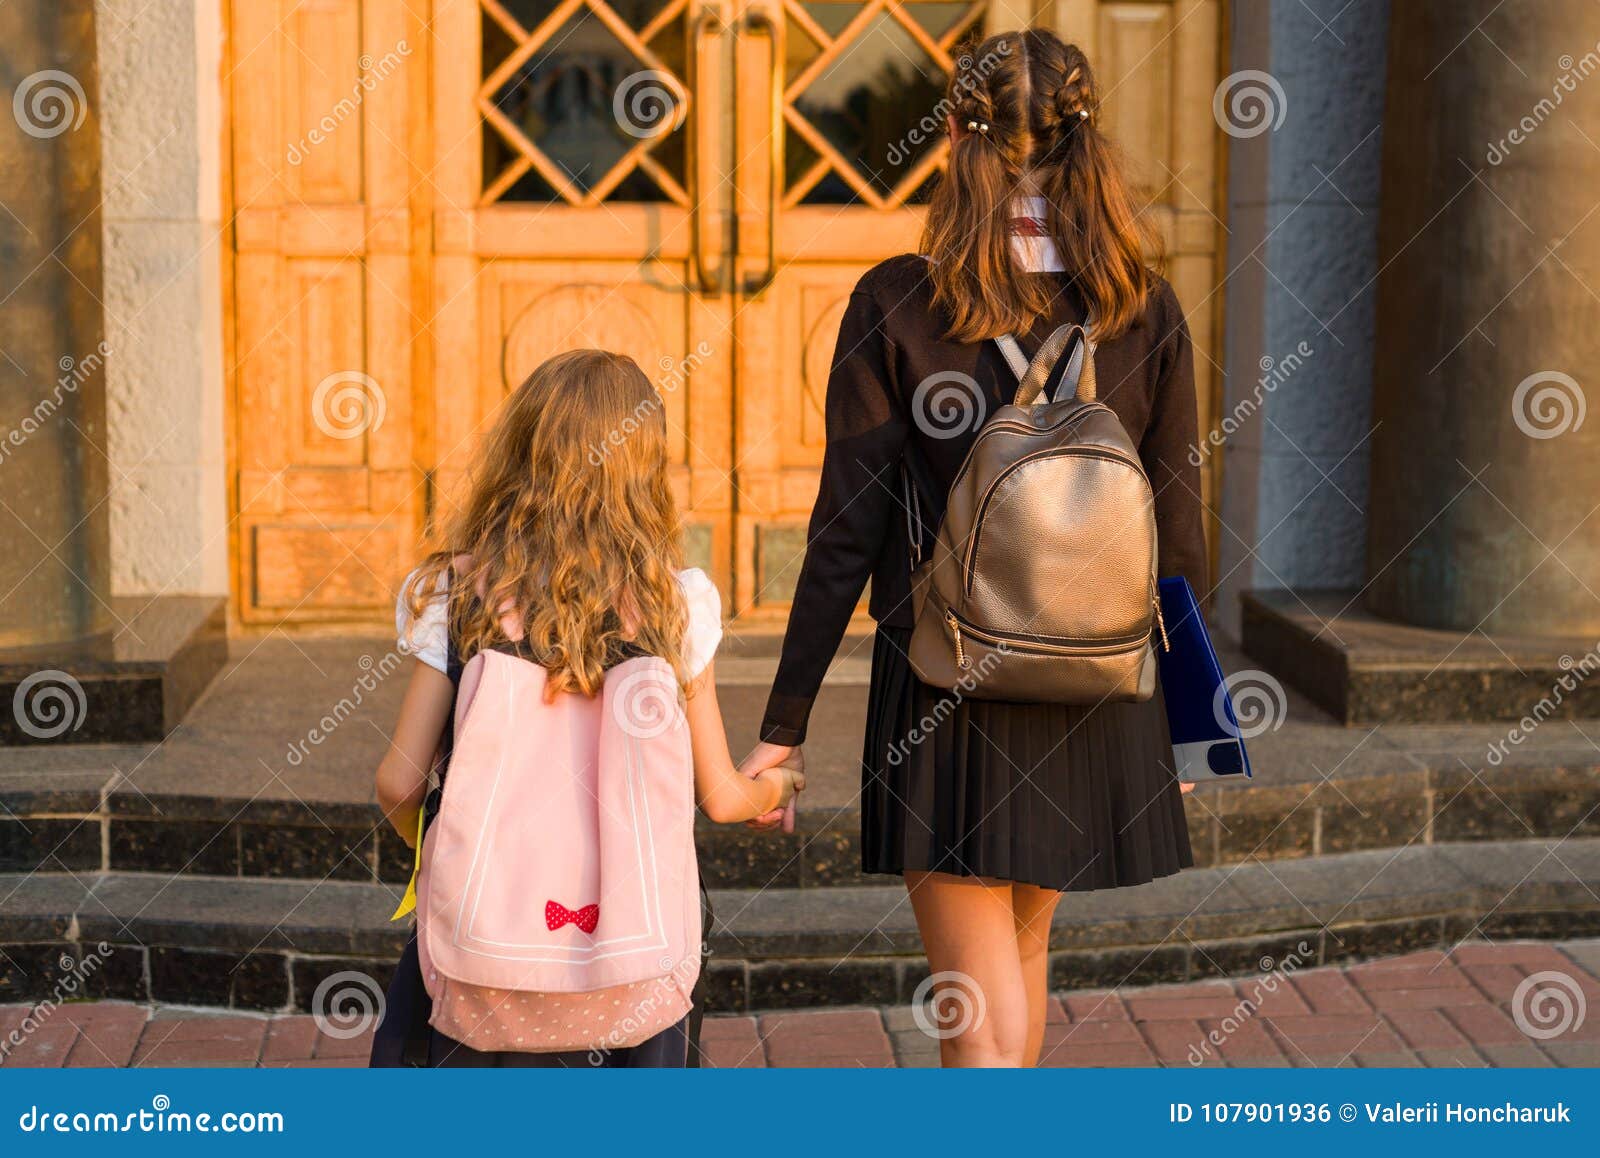 Outdoor Portrait Of Two Girls Stock Photo Image Of Outdoor